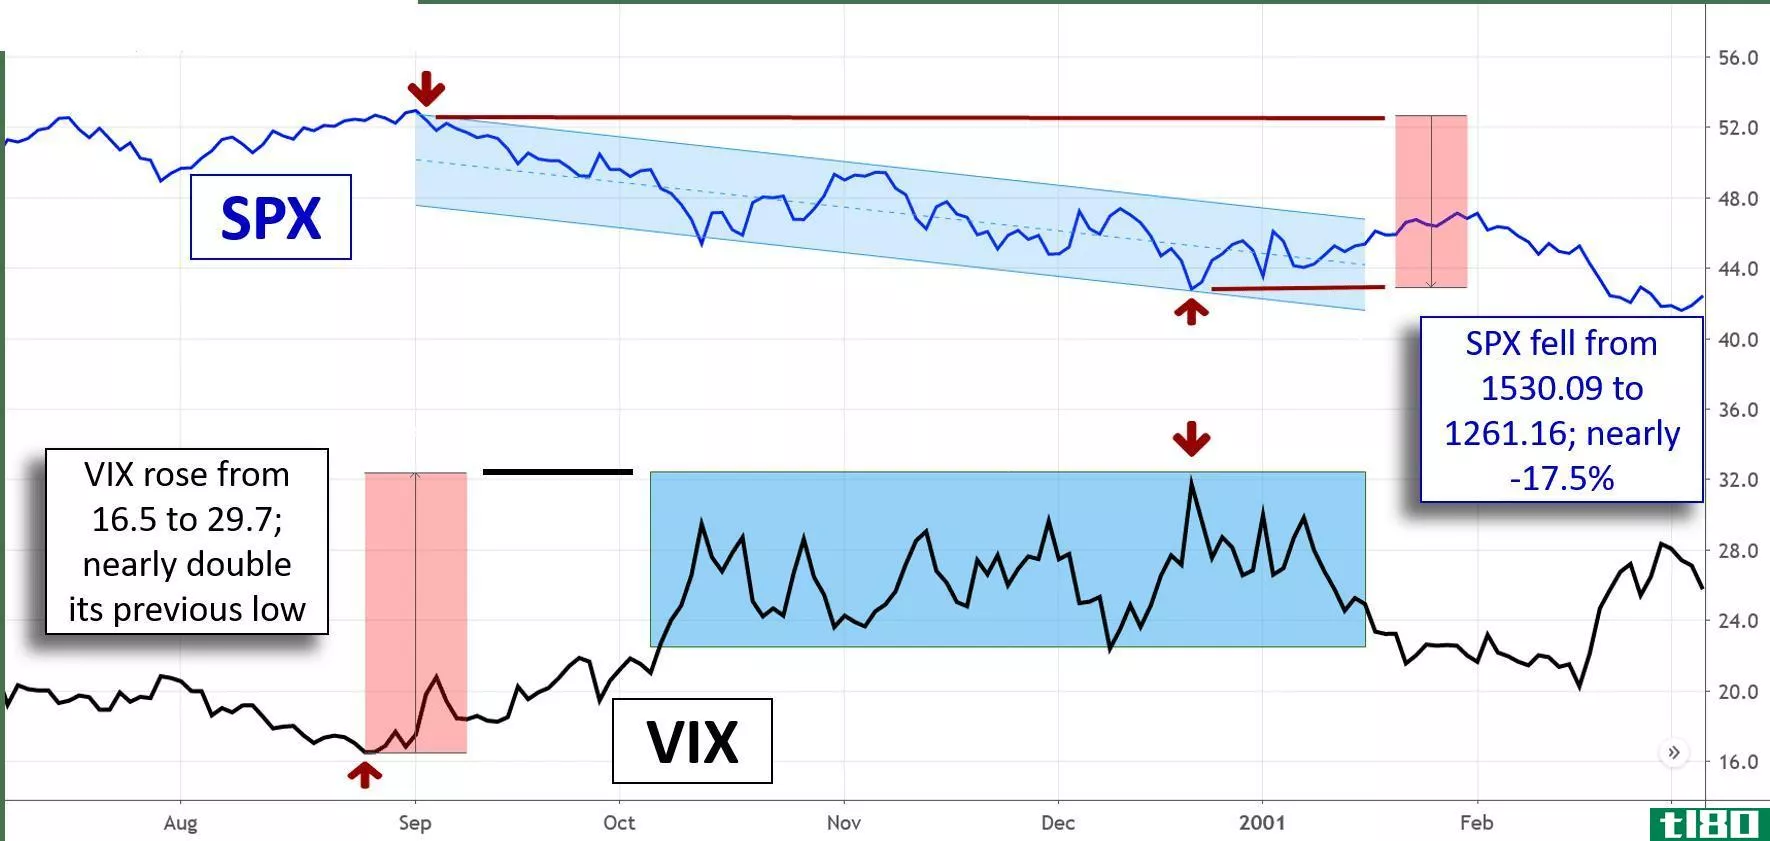 SPX compared to VIX - 2000